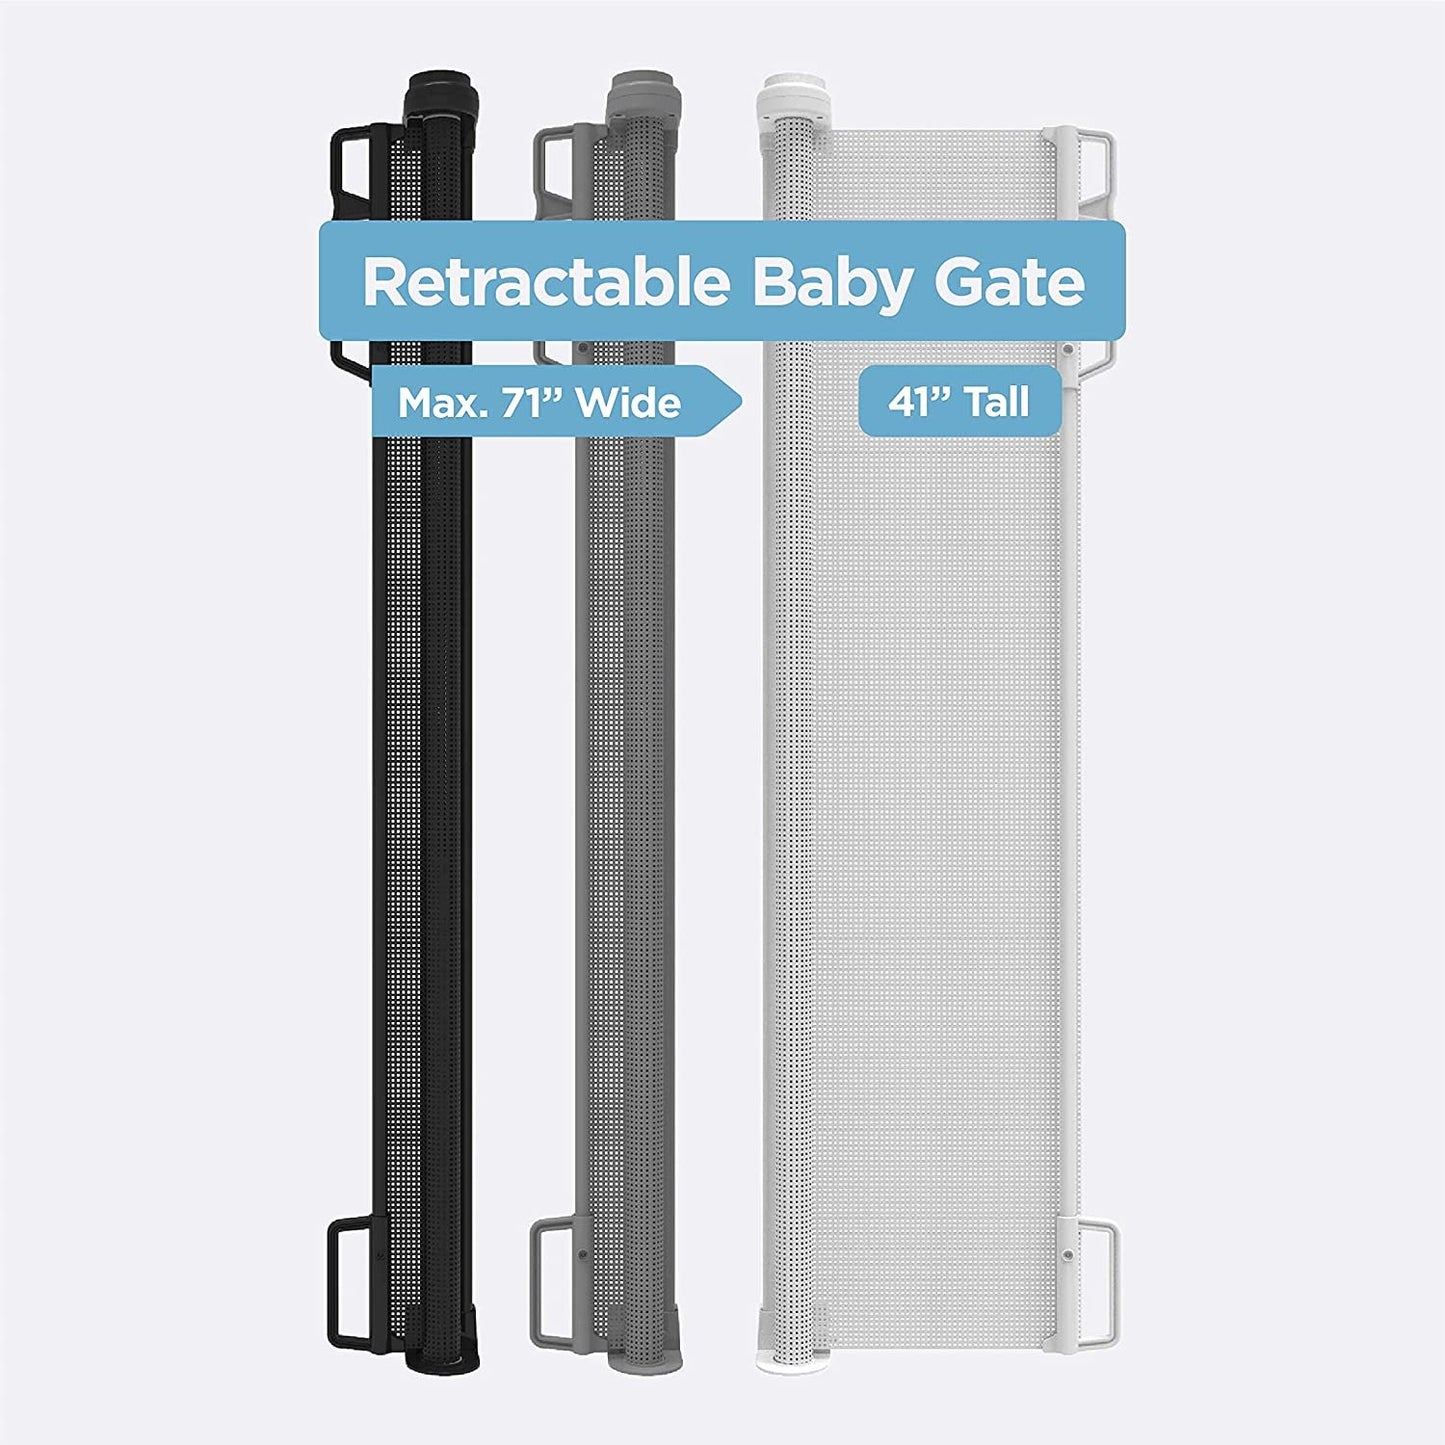 Perma Child Safety Indoor/Outdoor Retractable Baby Gate 41" Tall, Extends to 71" Wide, White